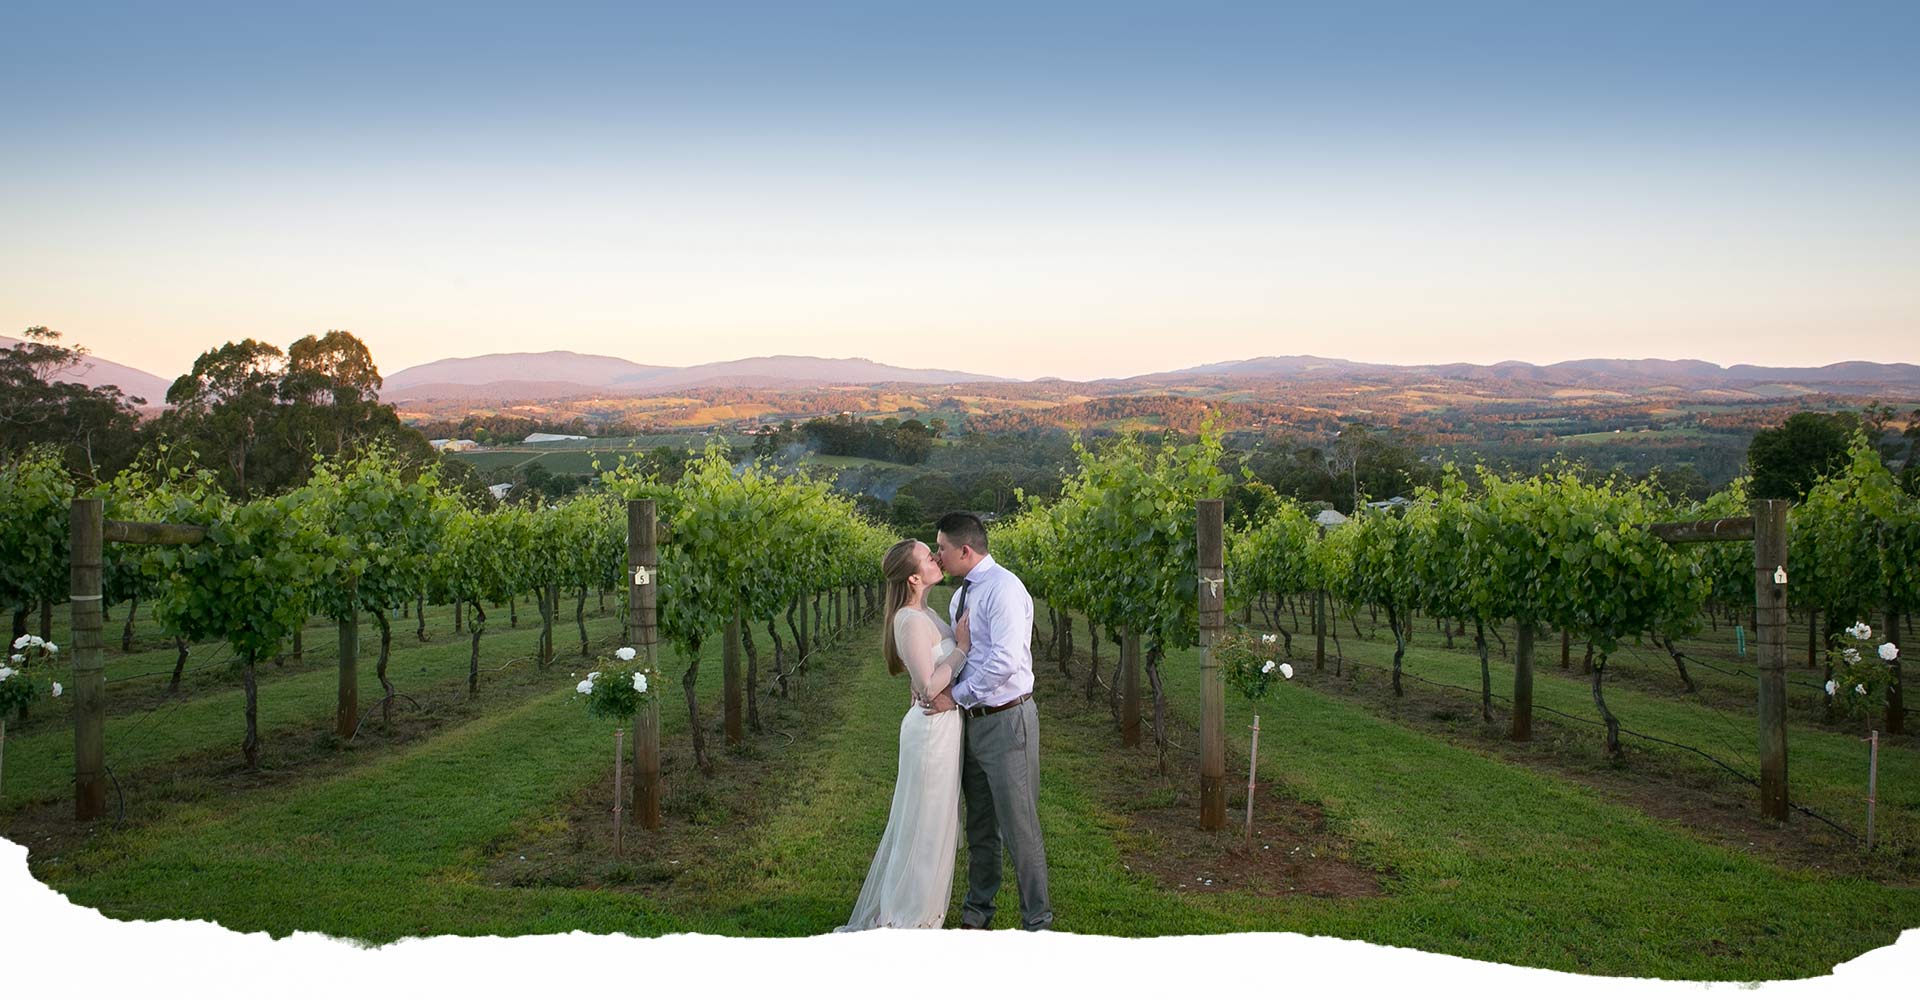 Married couple standing in front of vineyard